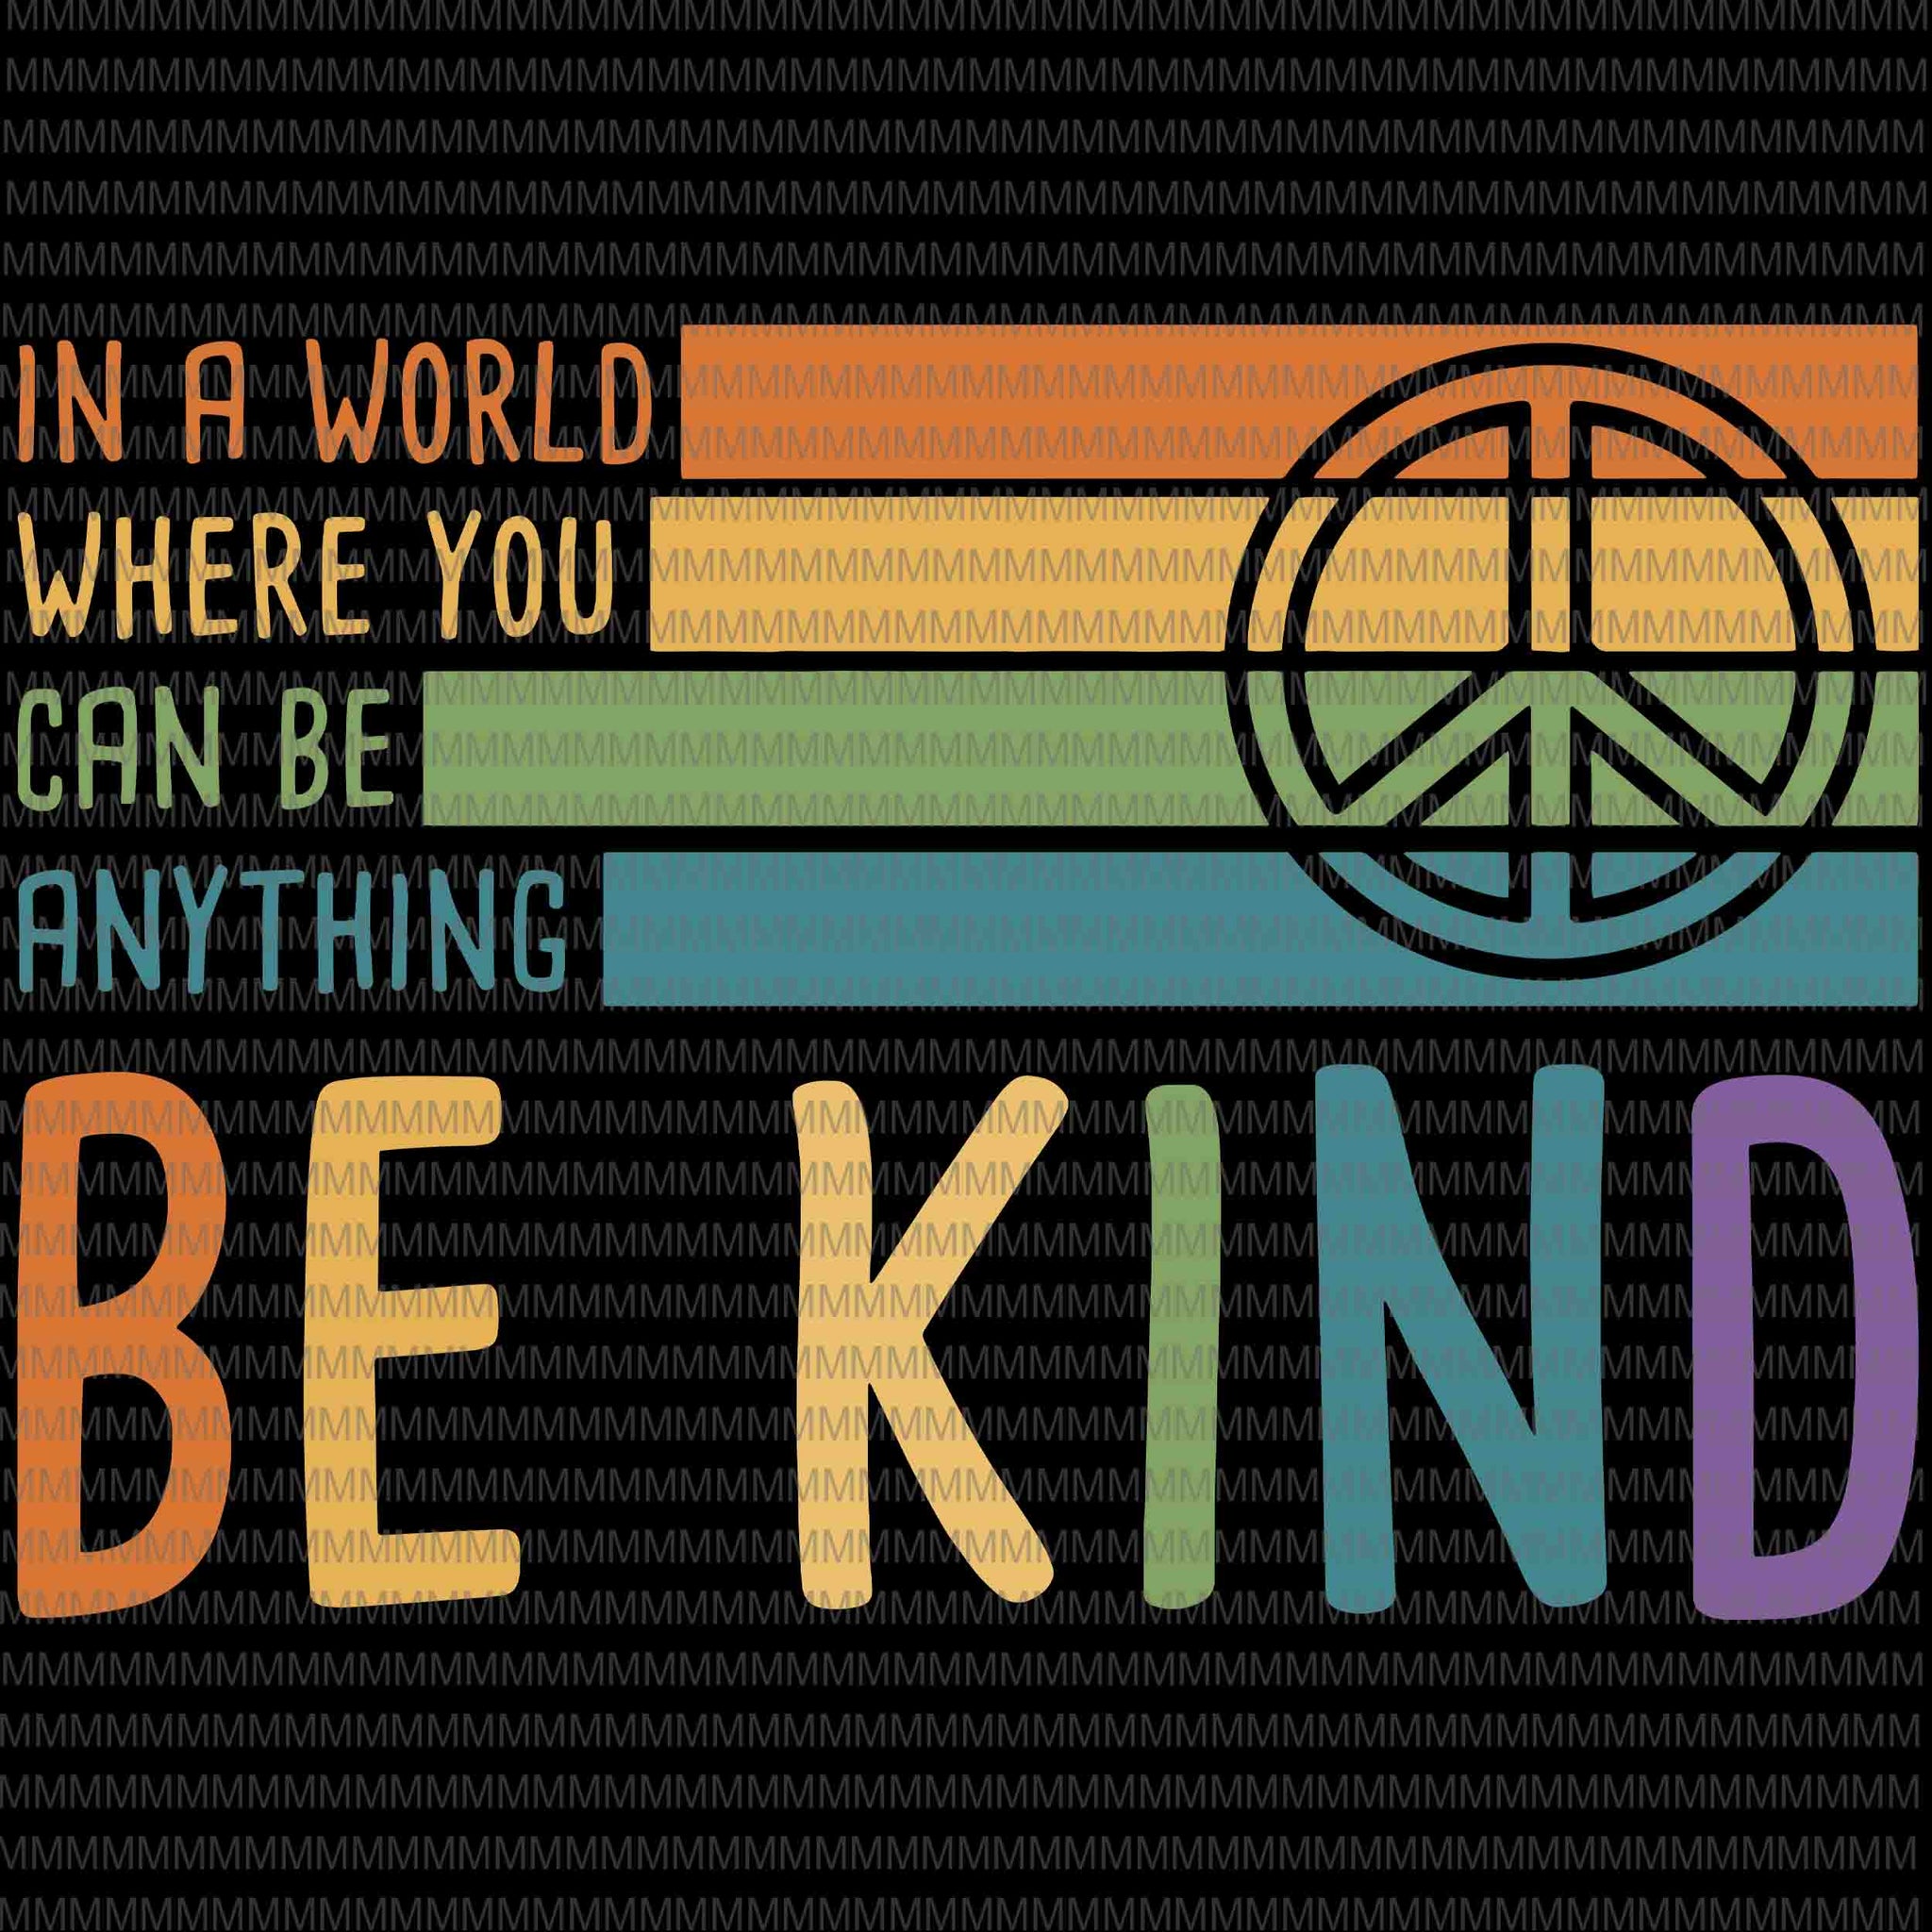 Be kind svg, in a world where you can be any thing svg, be kind vector, be kind design, be kind hand svg